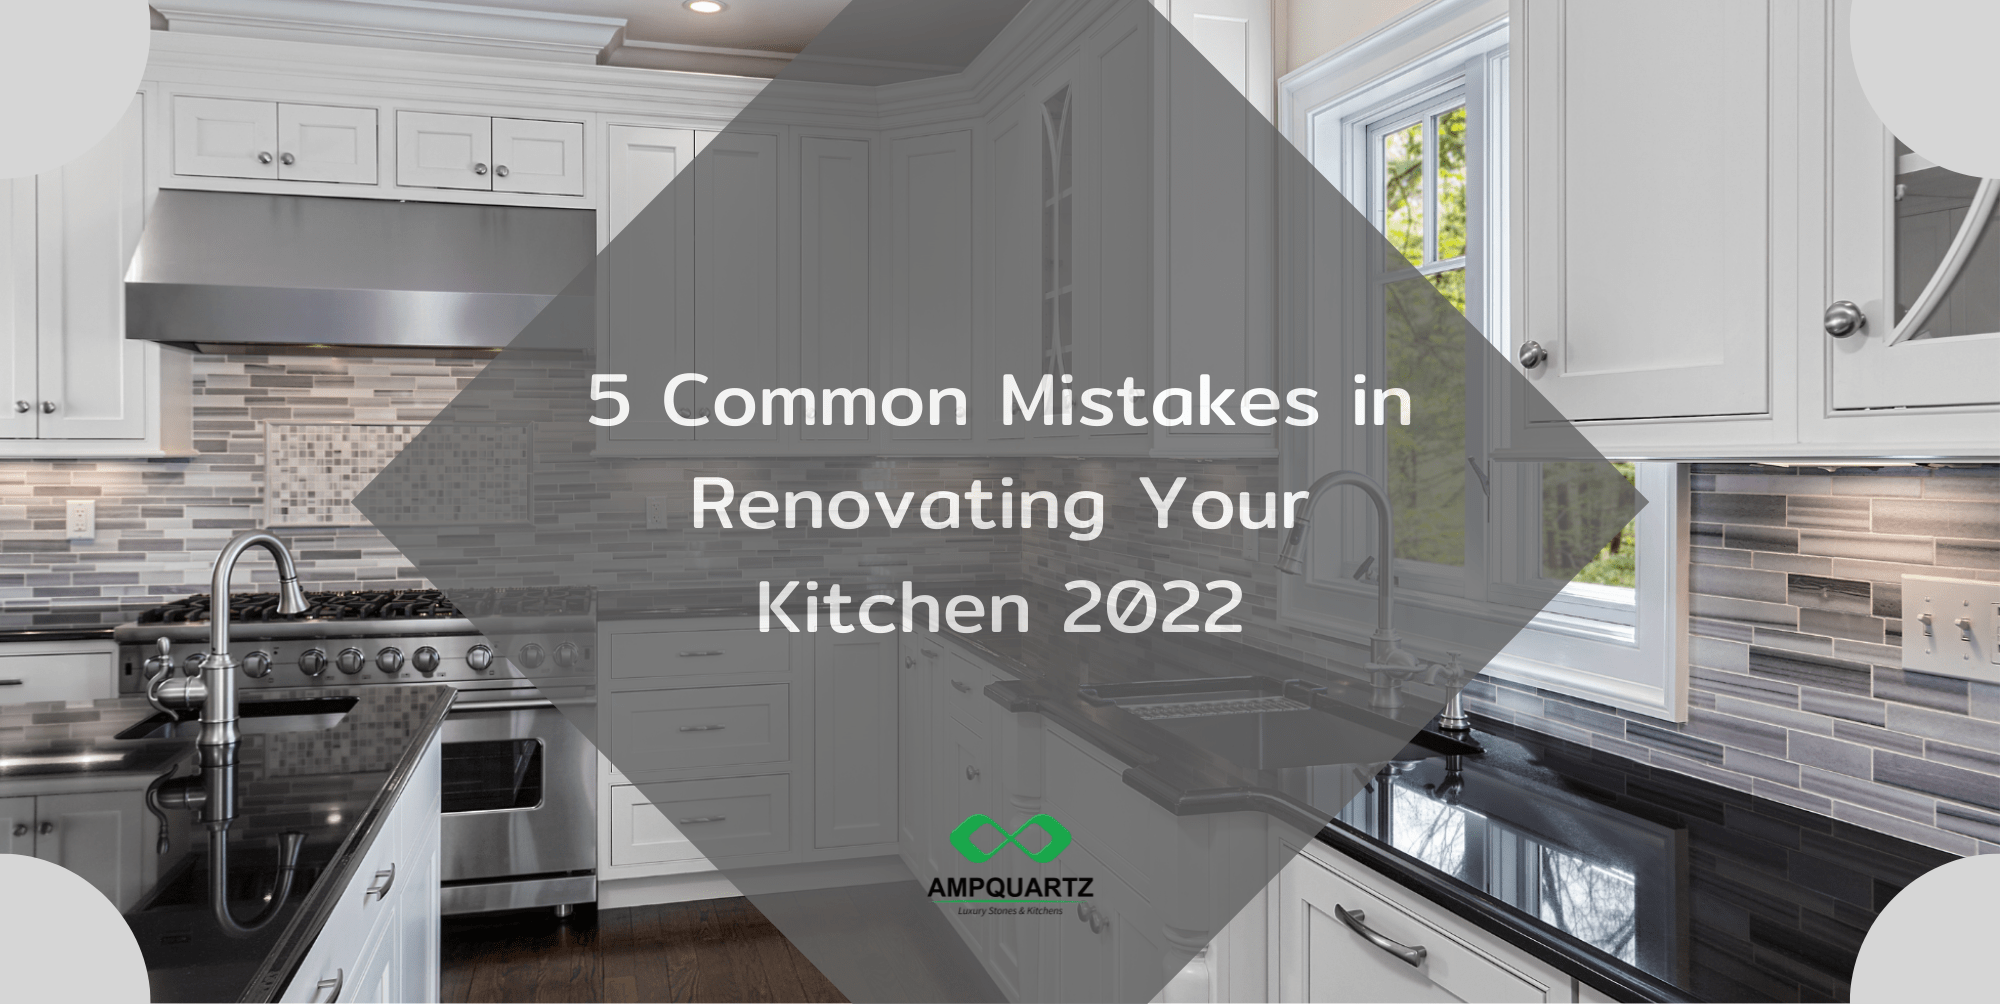 5 Common Mistakes in Renovating Your Kitchen 2022